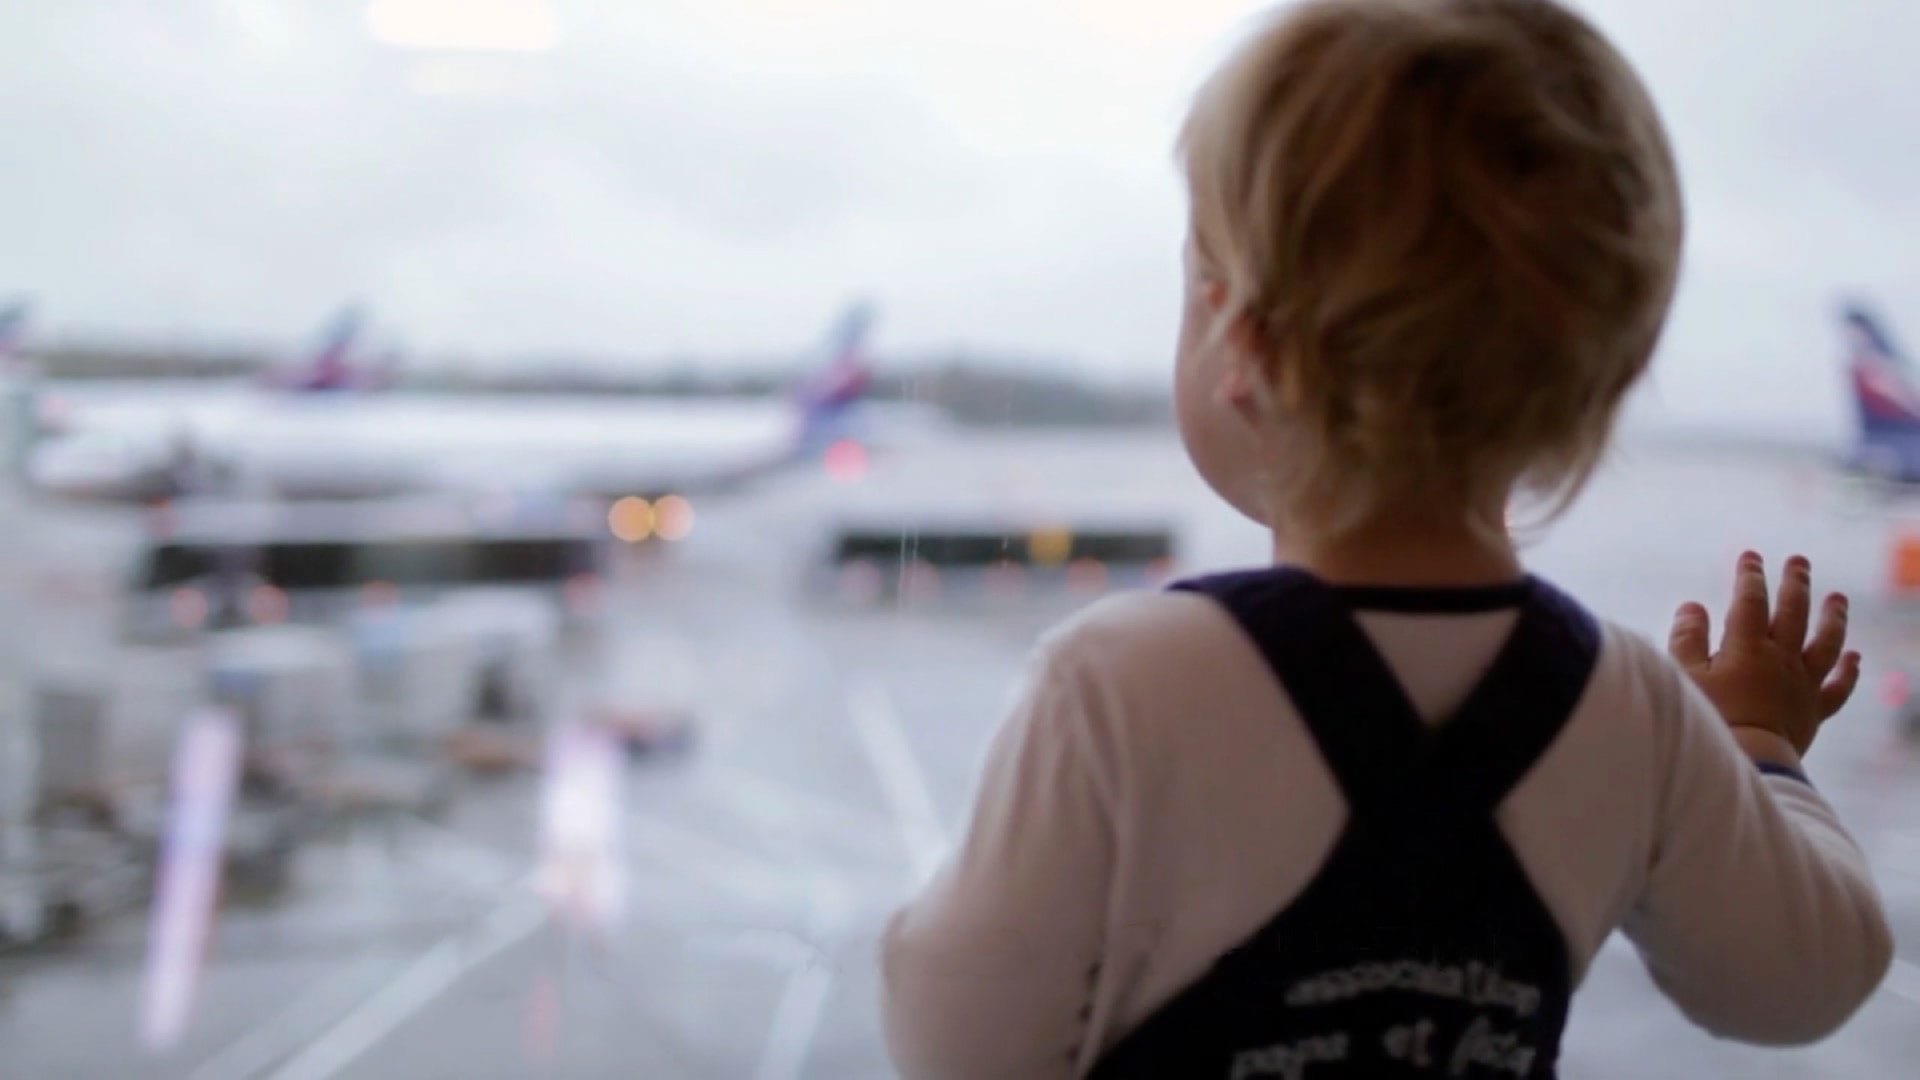 Little boy wearing black coveralls looking out onto the tarmac at a plane at an airport.